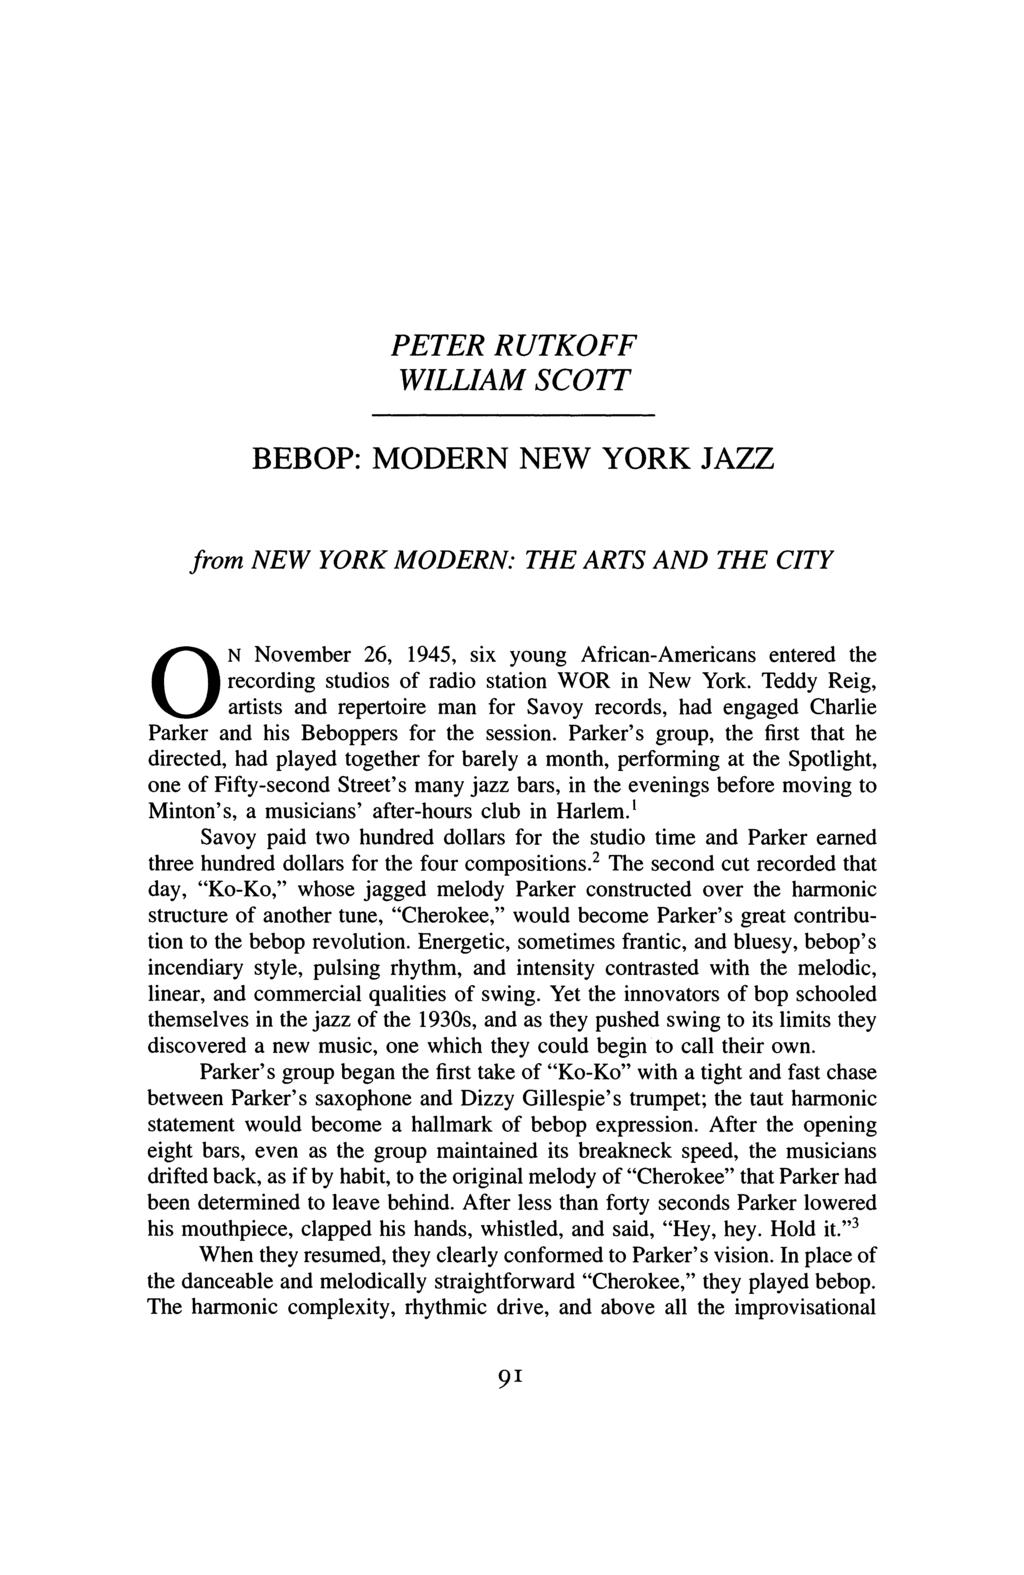 PETER RUTKOFF WILLIAM SCOlT BEBOP: MODERN NEW YORK JAZZ from NEW YORK MODERN: THE ARTS AND THE CITY O N November 26, 1945, six young African-Americans entered the recording studios of radio station